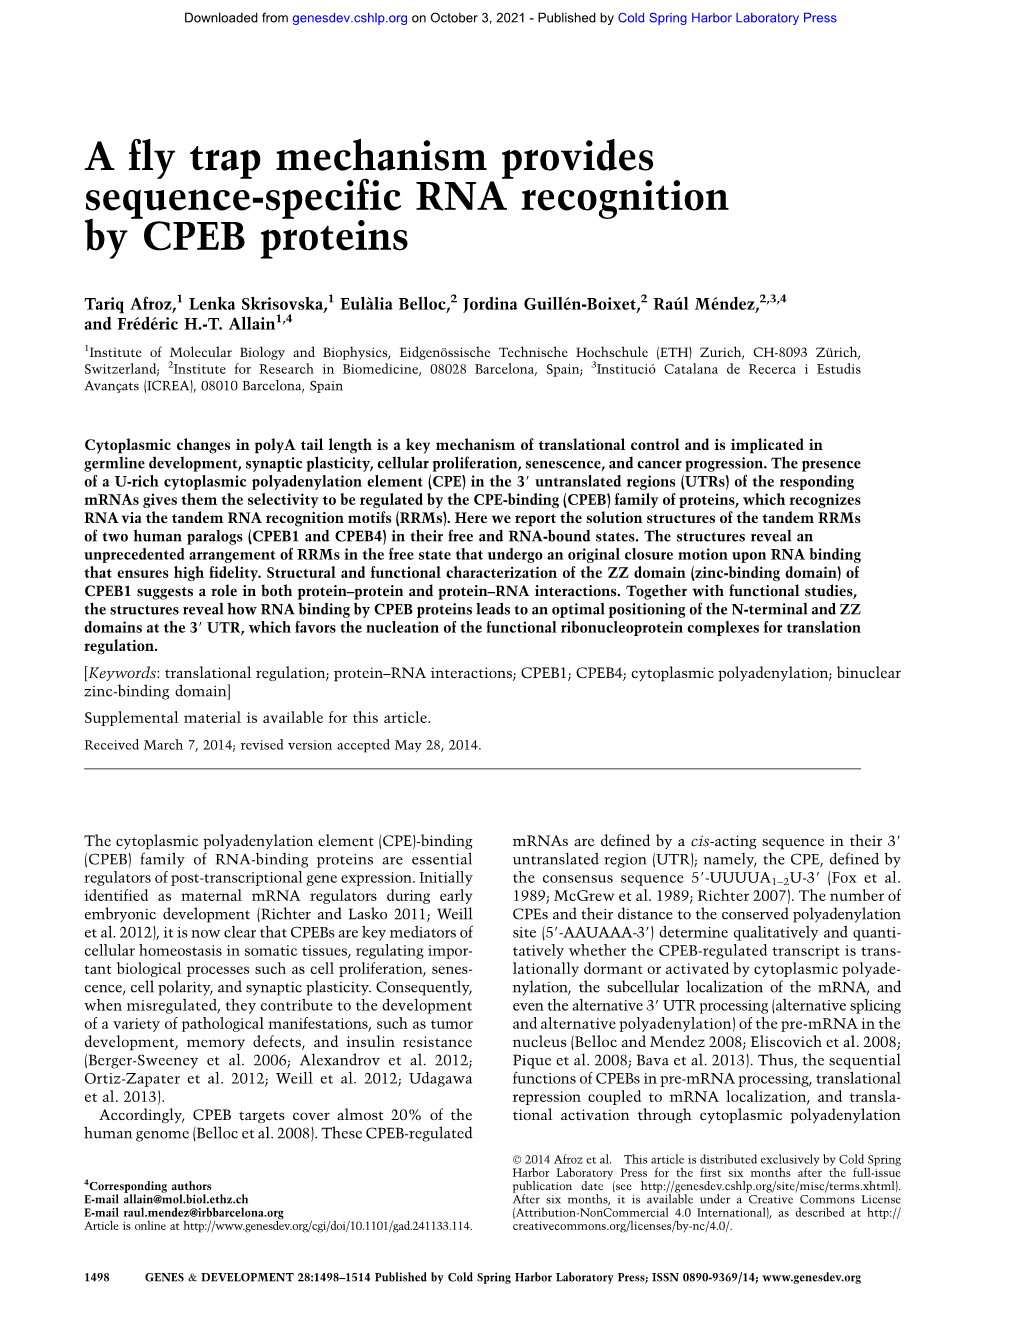 A Fly Trap Mechanism Provides Sequence-Specific RNA Recognition by CPEB Proteins